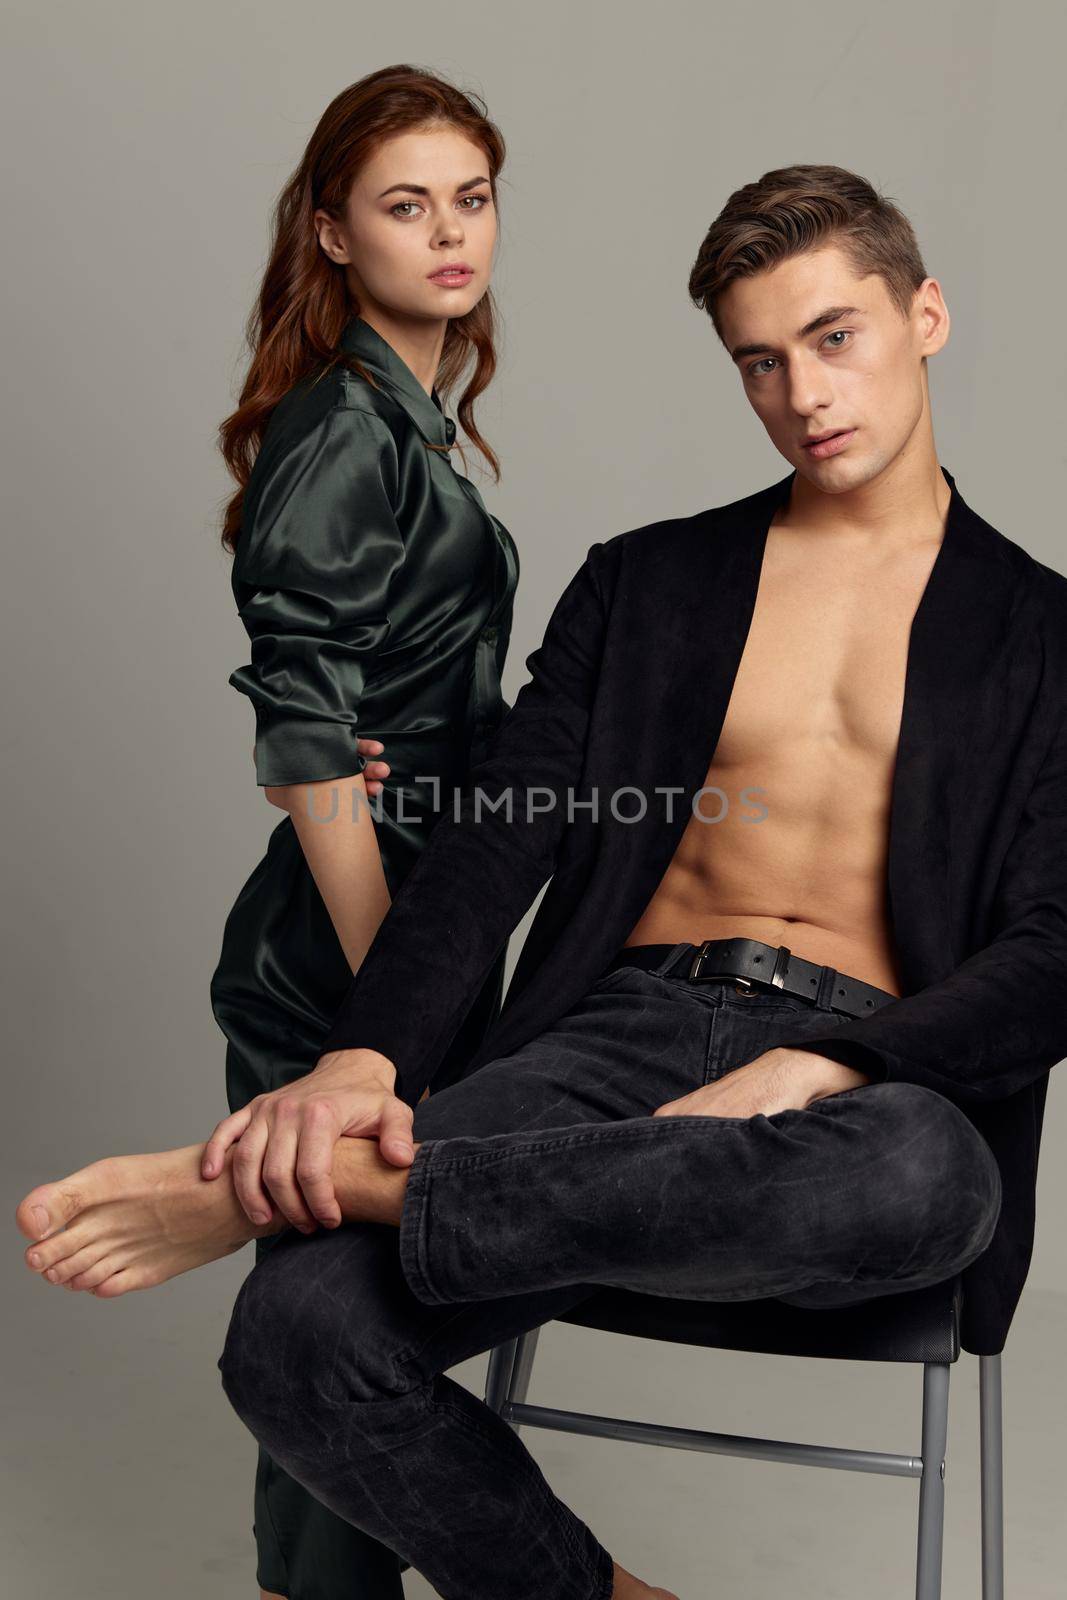 A man with an unbuttoned shirt sits on a chair next to a woman romance luxury seduction. High quality photo